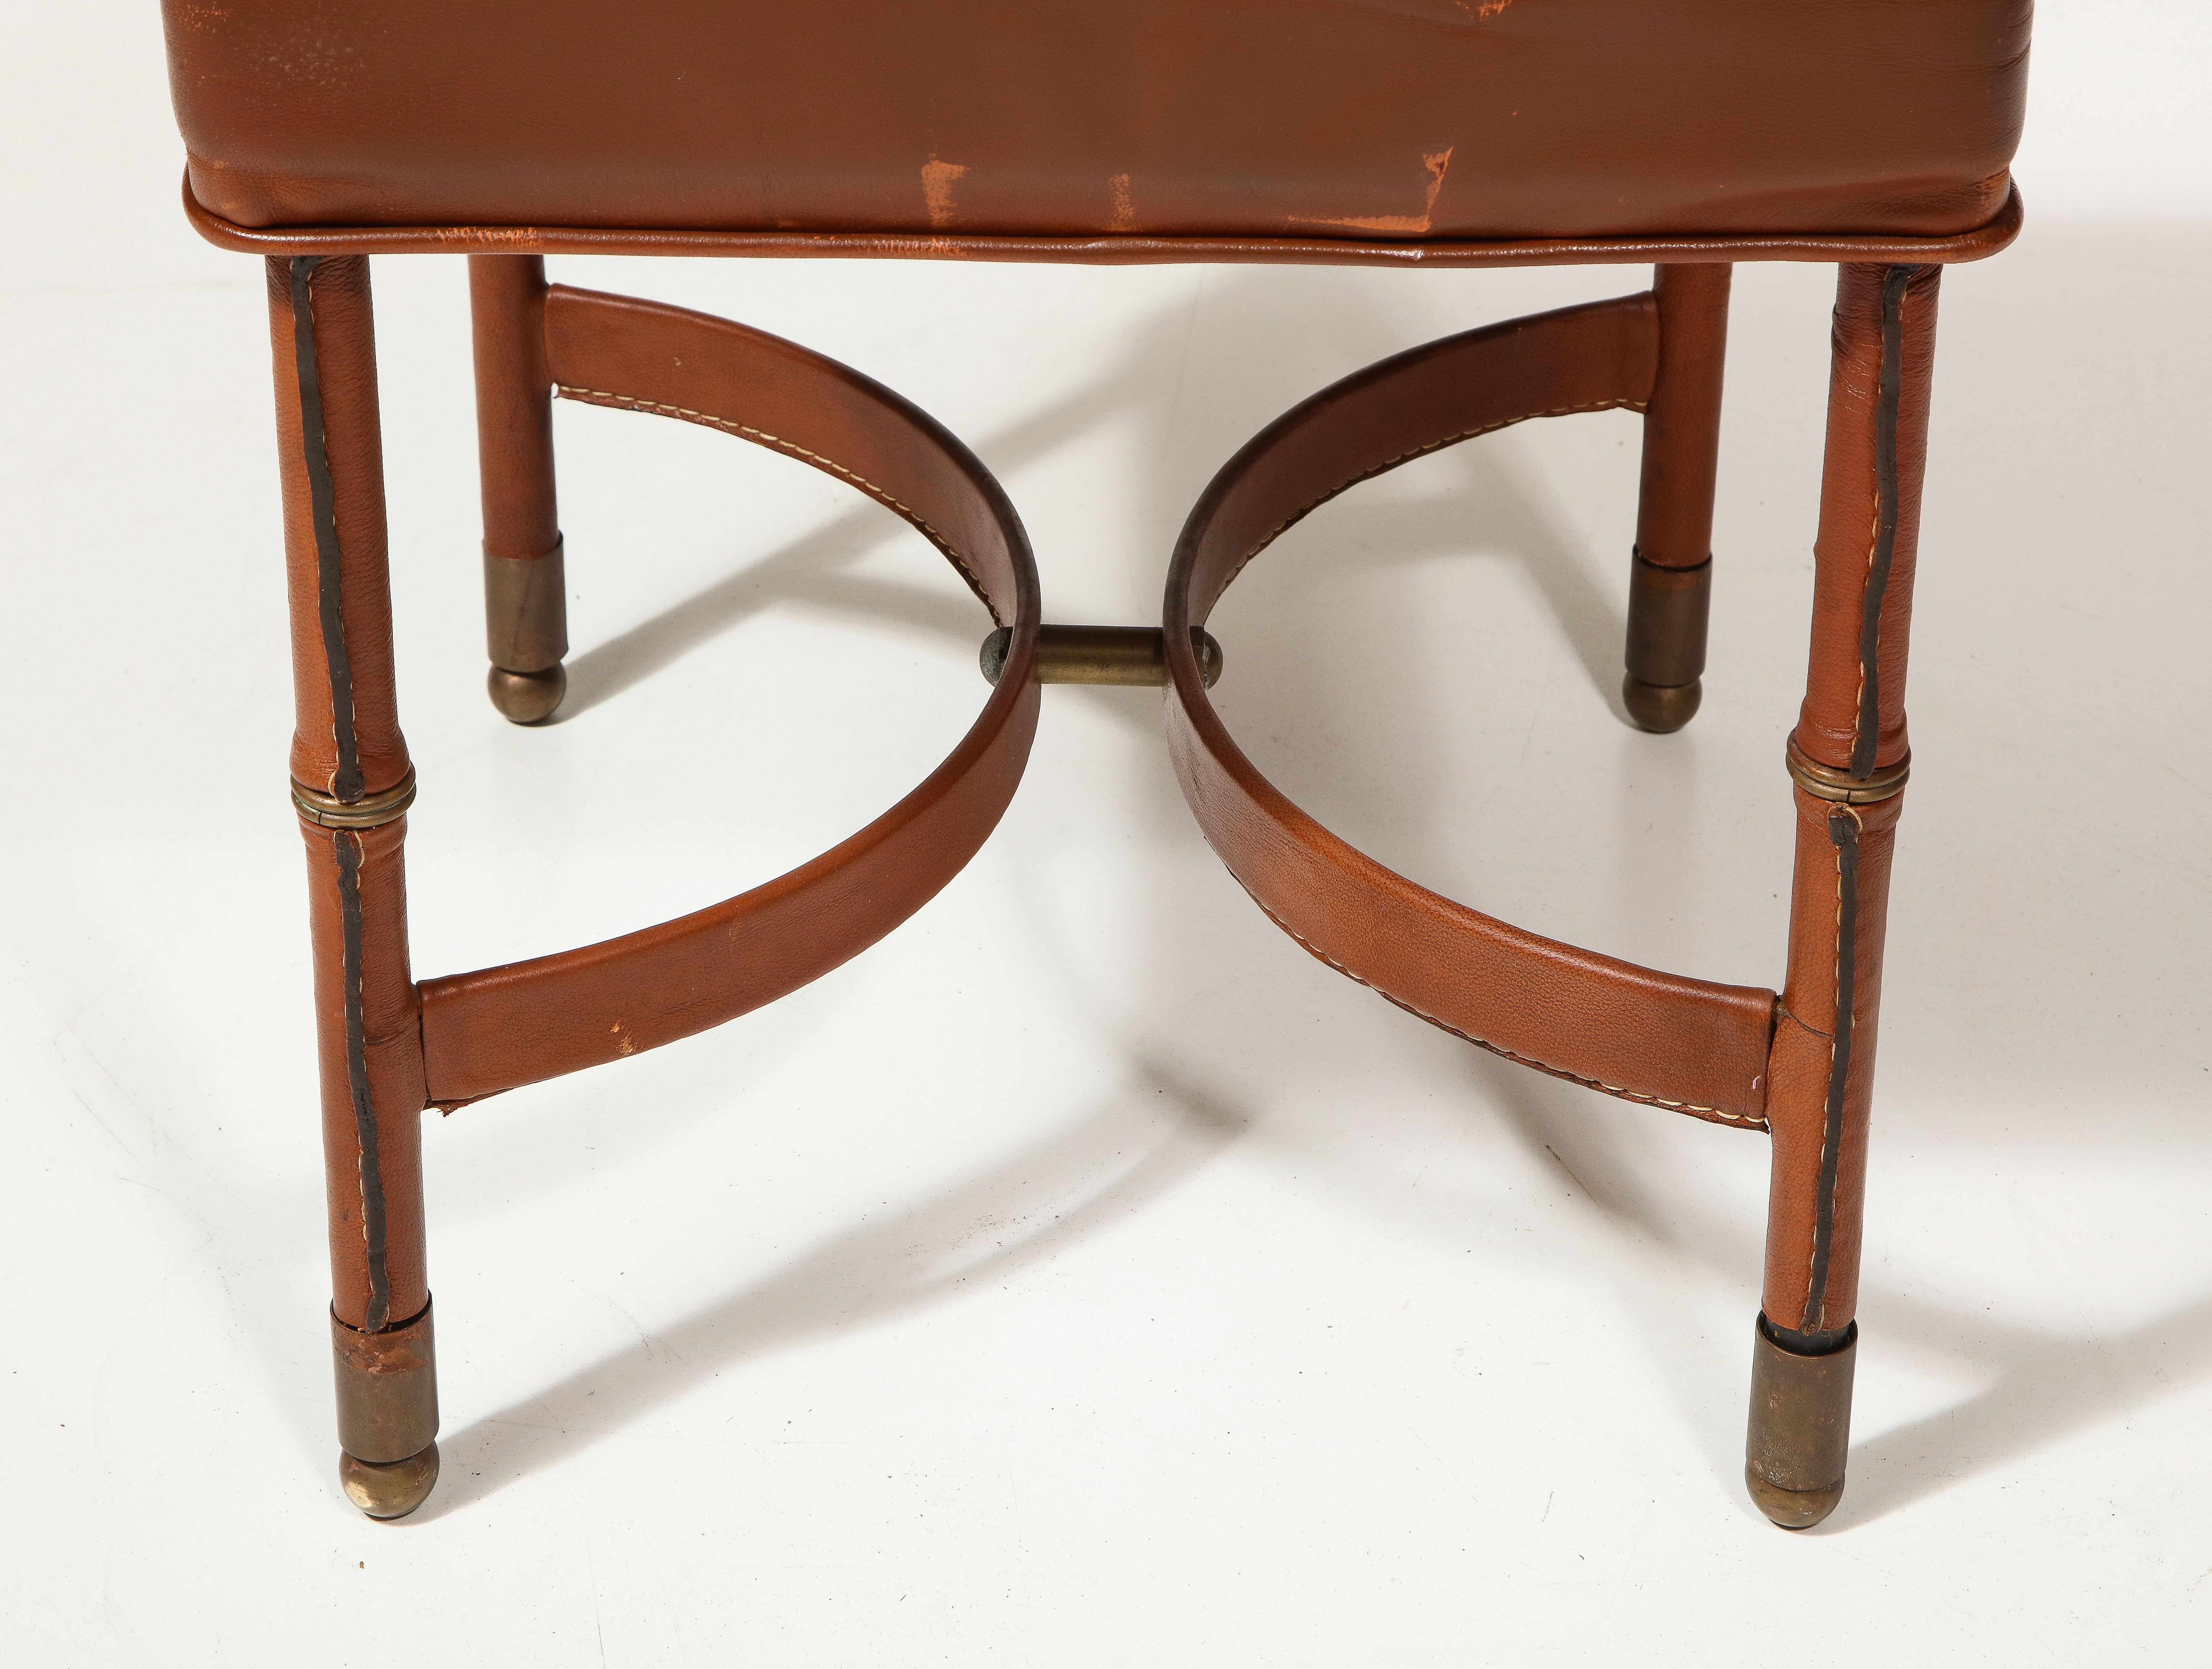 Leather Stool with Brass Capped Feet by Jacques Adnet, France, c. 1940 For Sale 5